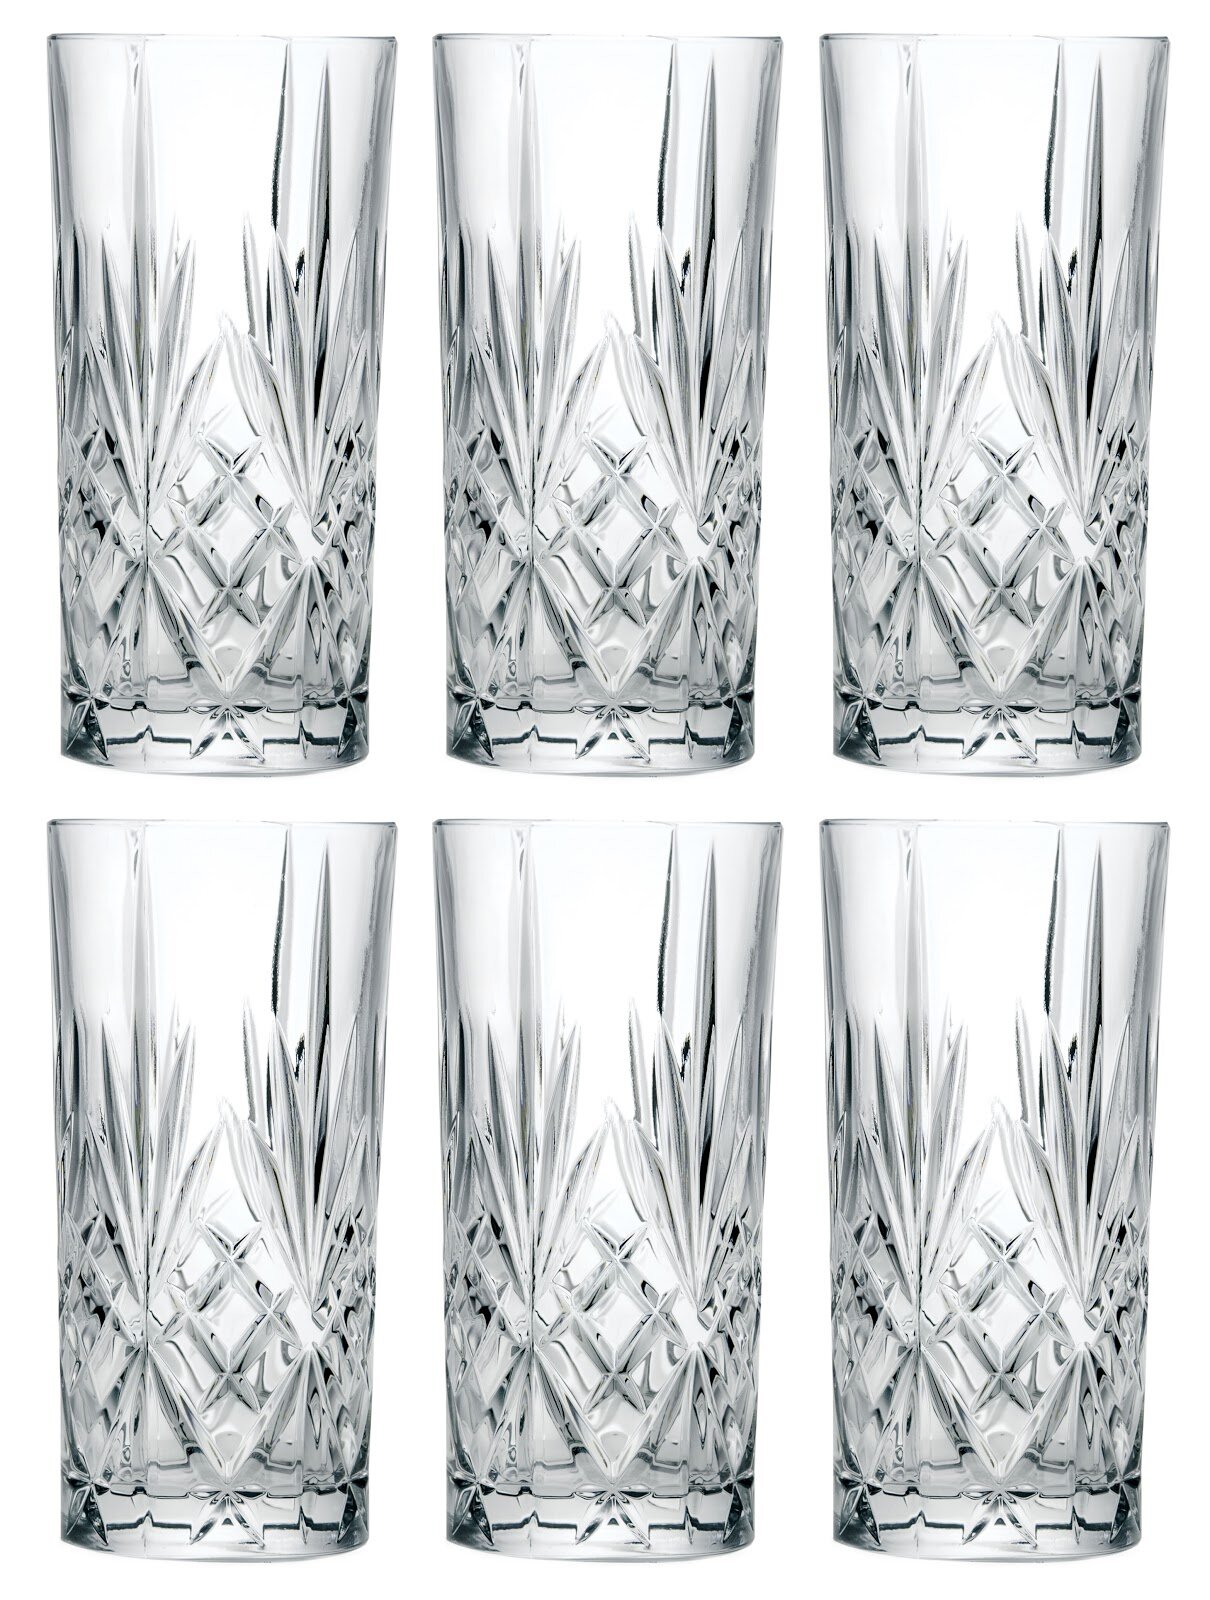 Lorren Home Trends Ego 12 oz. Old Fashioned Glass (Set of 6), Clear